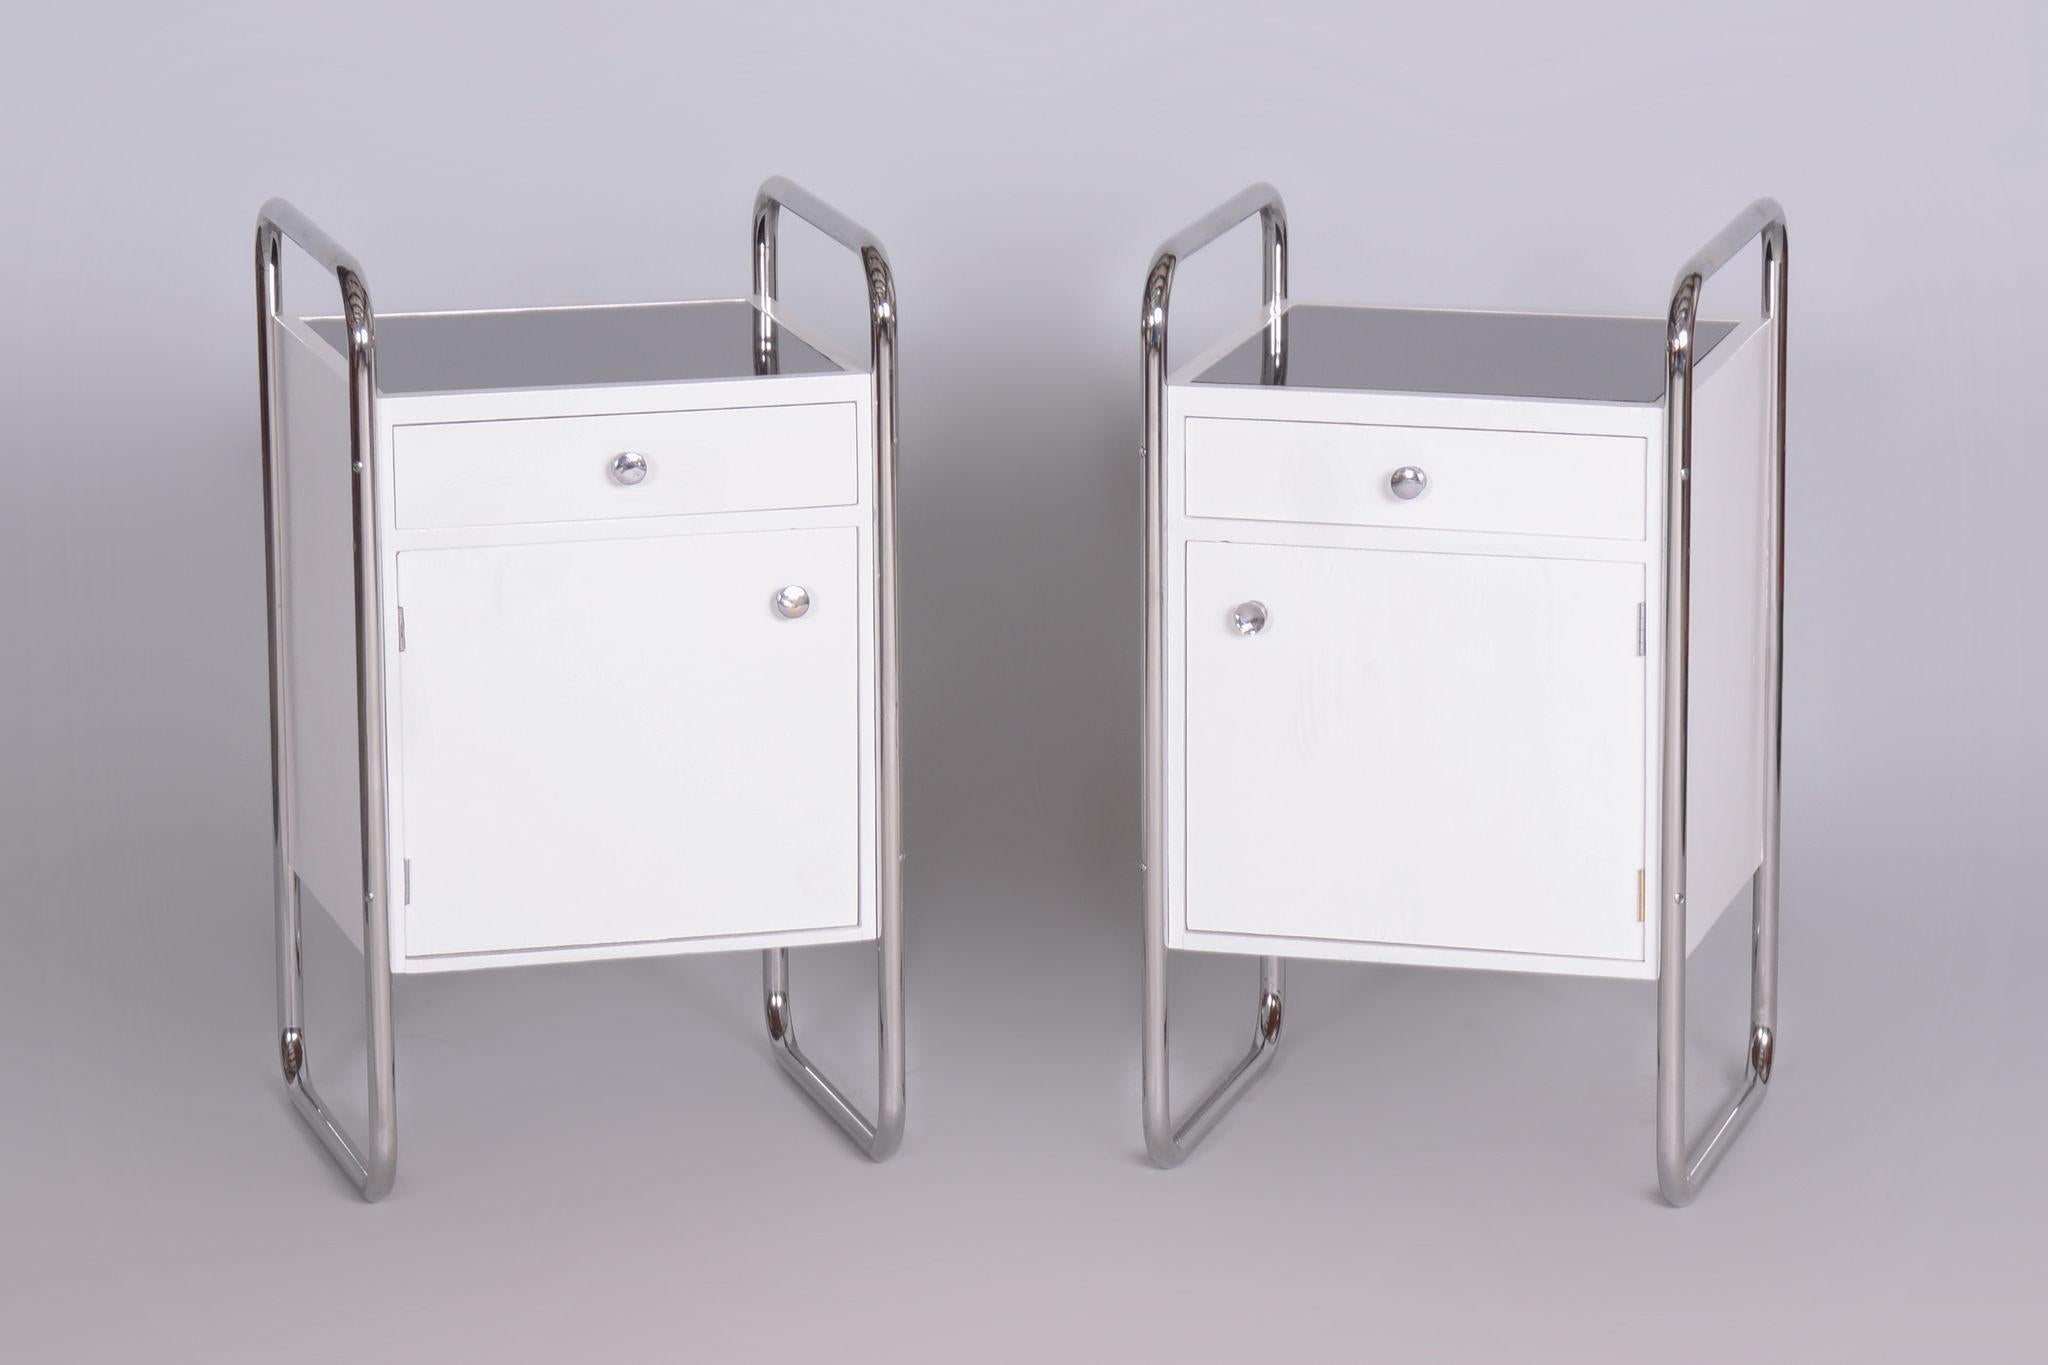 Restored Bauhaus Pair of Bedside Tables, Vichr a spol, Chrome, Czechia, 1930s For Sale 4